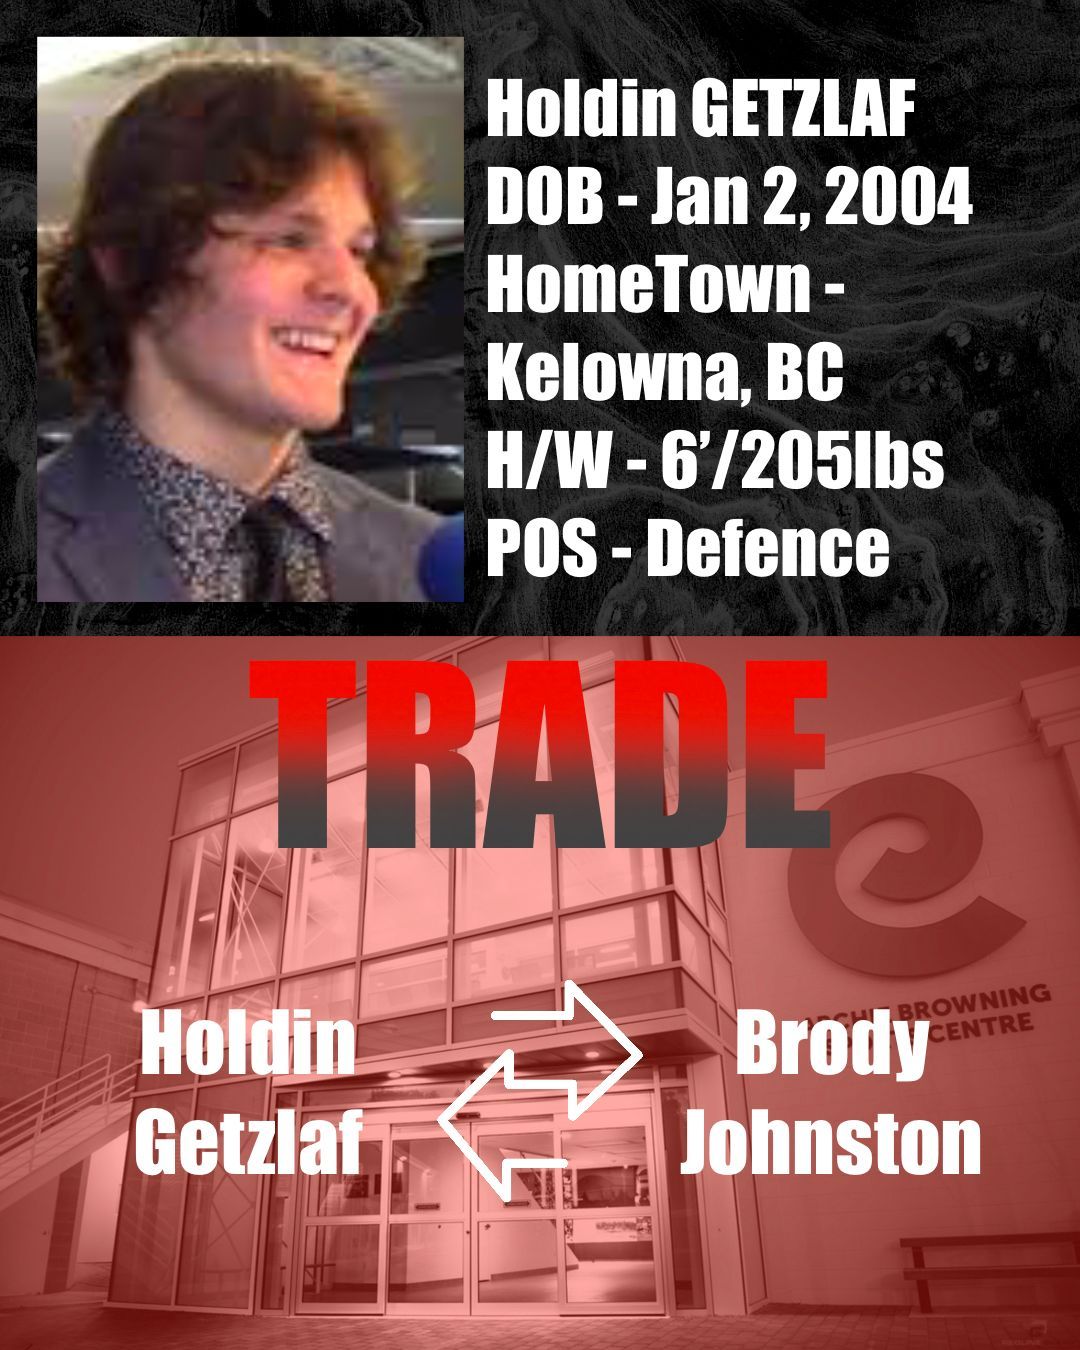 TRADE ALERT! The Cougars have traded Brody Johnston to the Kamloops Storm in exchange for ‘04 D-man Holdin Getzlaf and a PDF. Good luck to Brody as he moves for work, and welcome to the club Holdin!